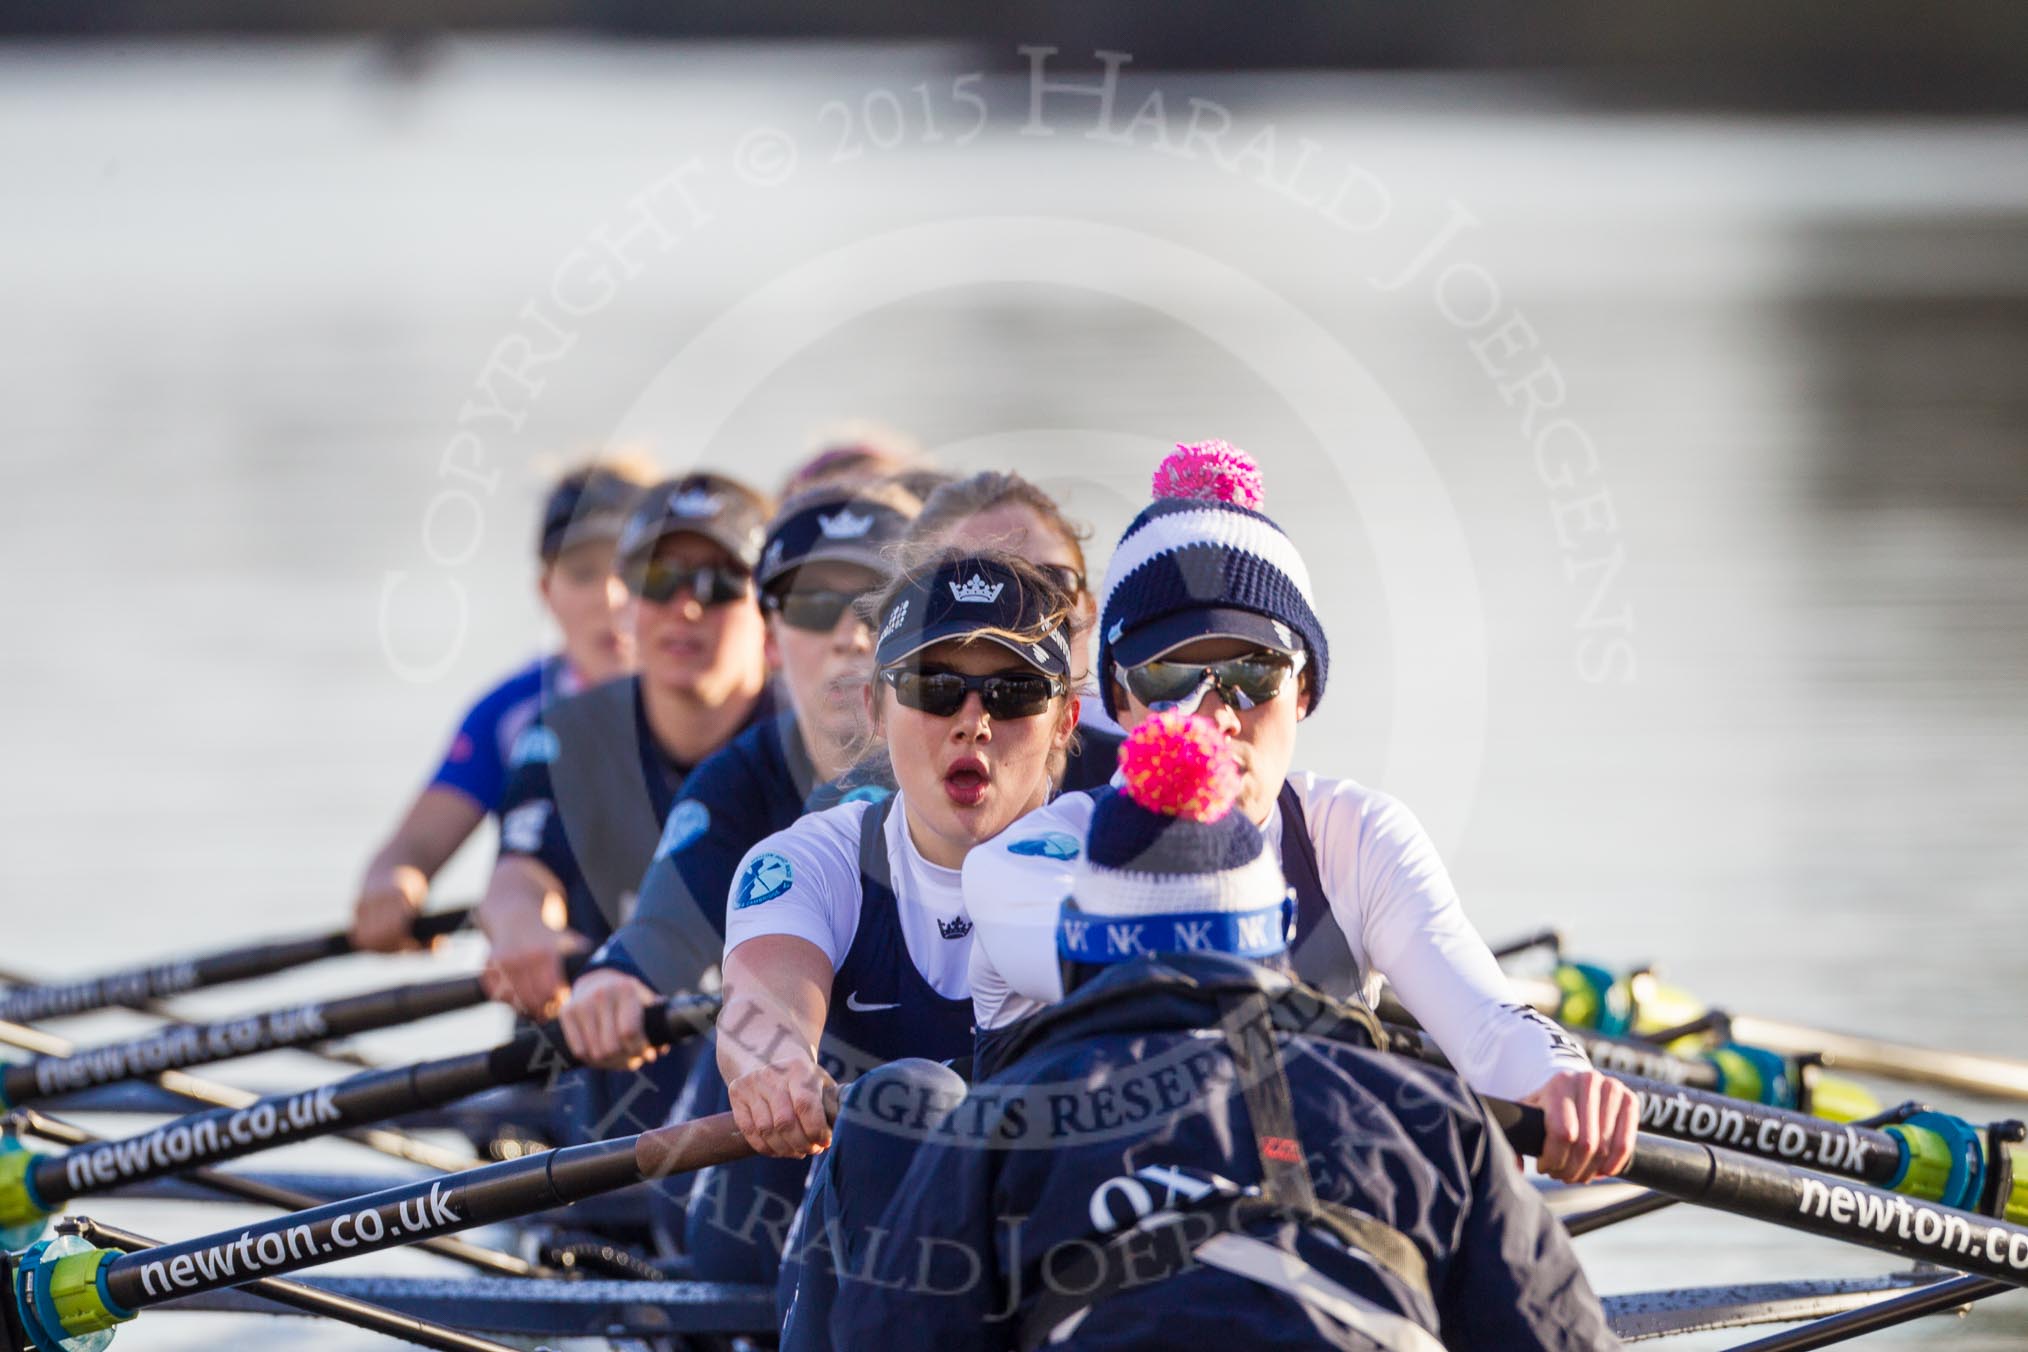 The Boat Race season 2015: OUWBC training Wallingford.

Wallingford,

United Kingdom,
on 04 March 2015 at 16:24, image #206